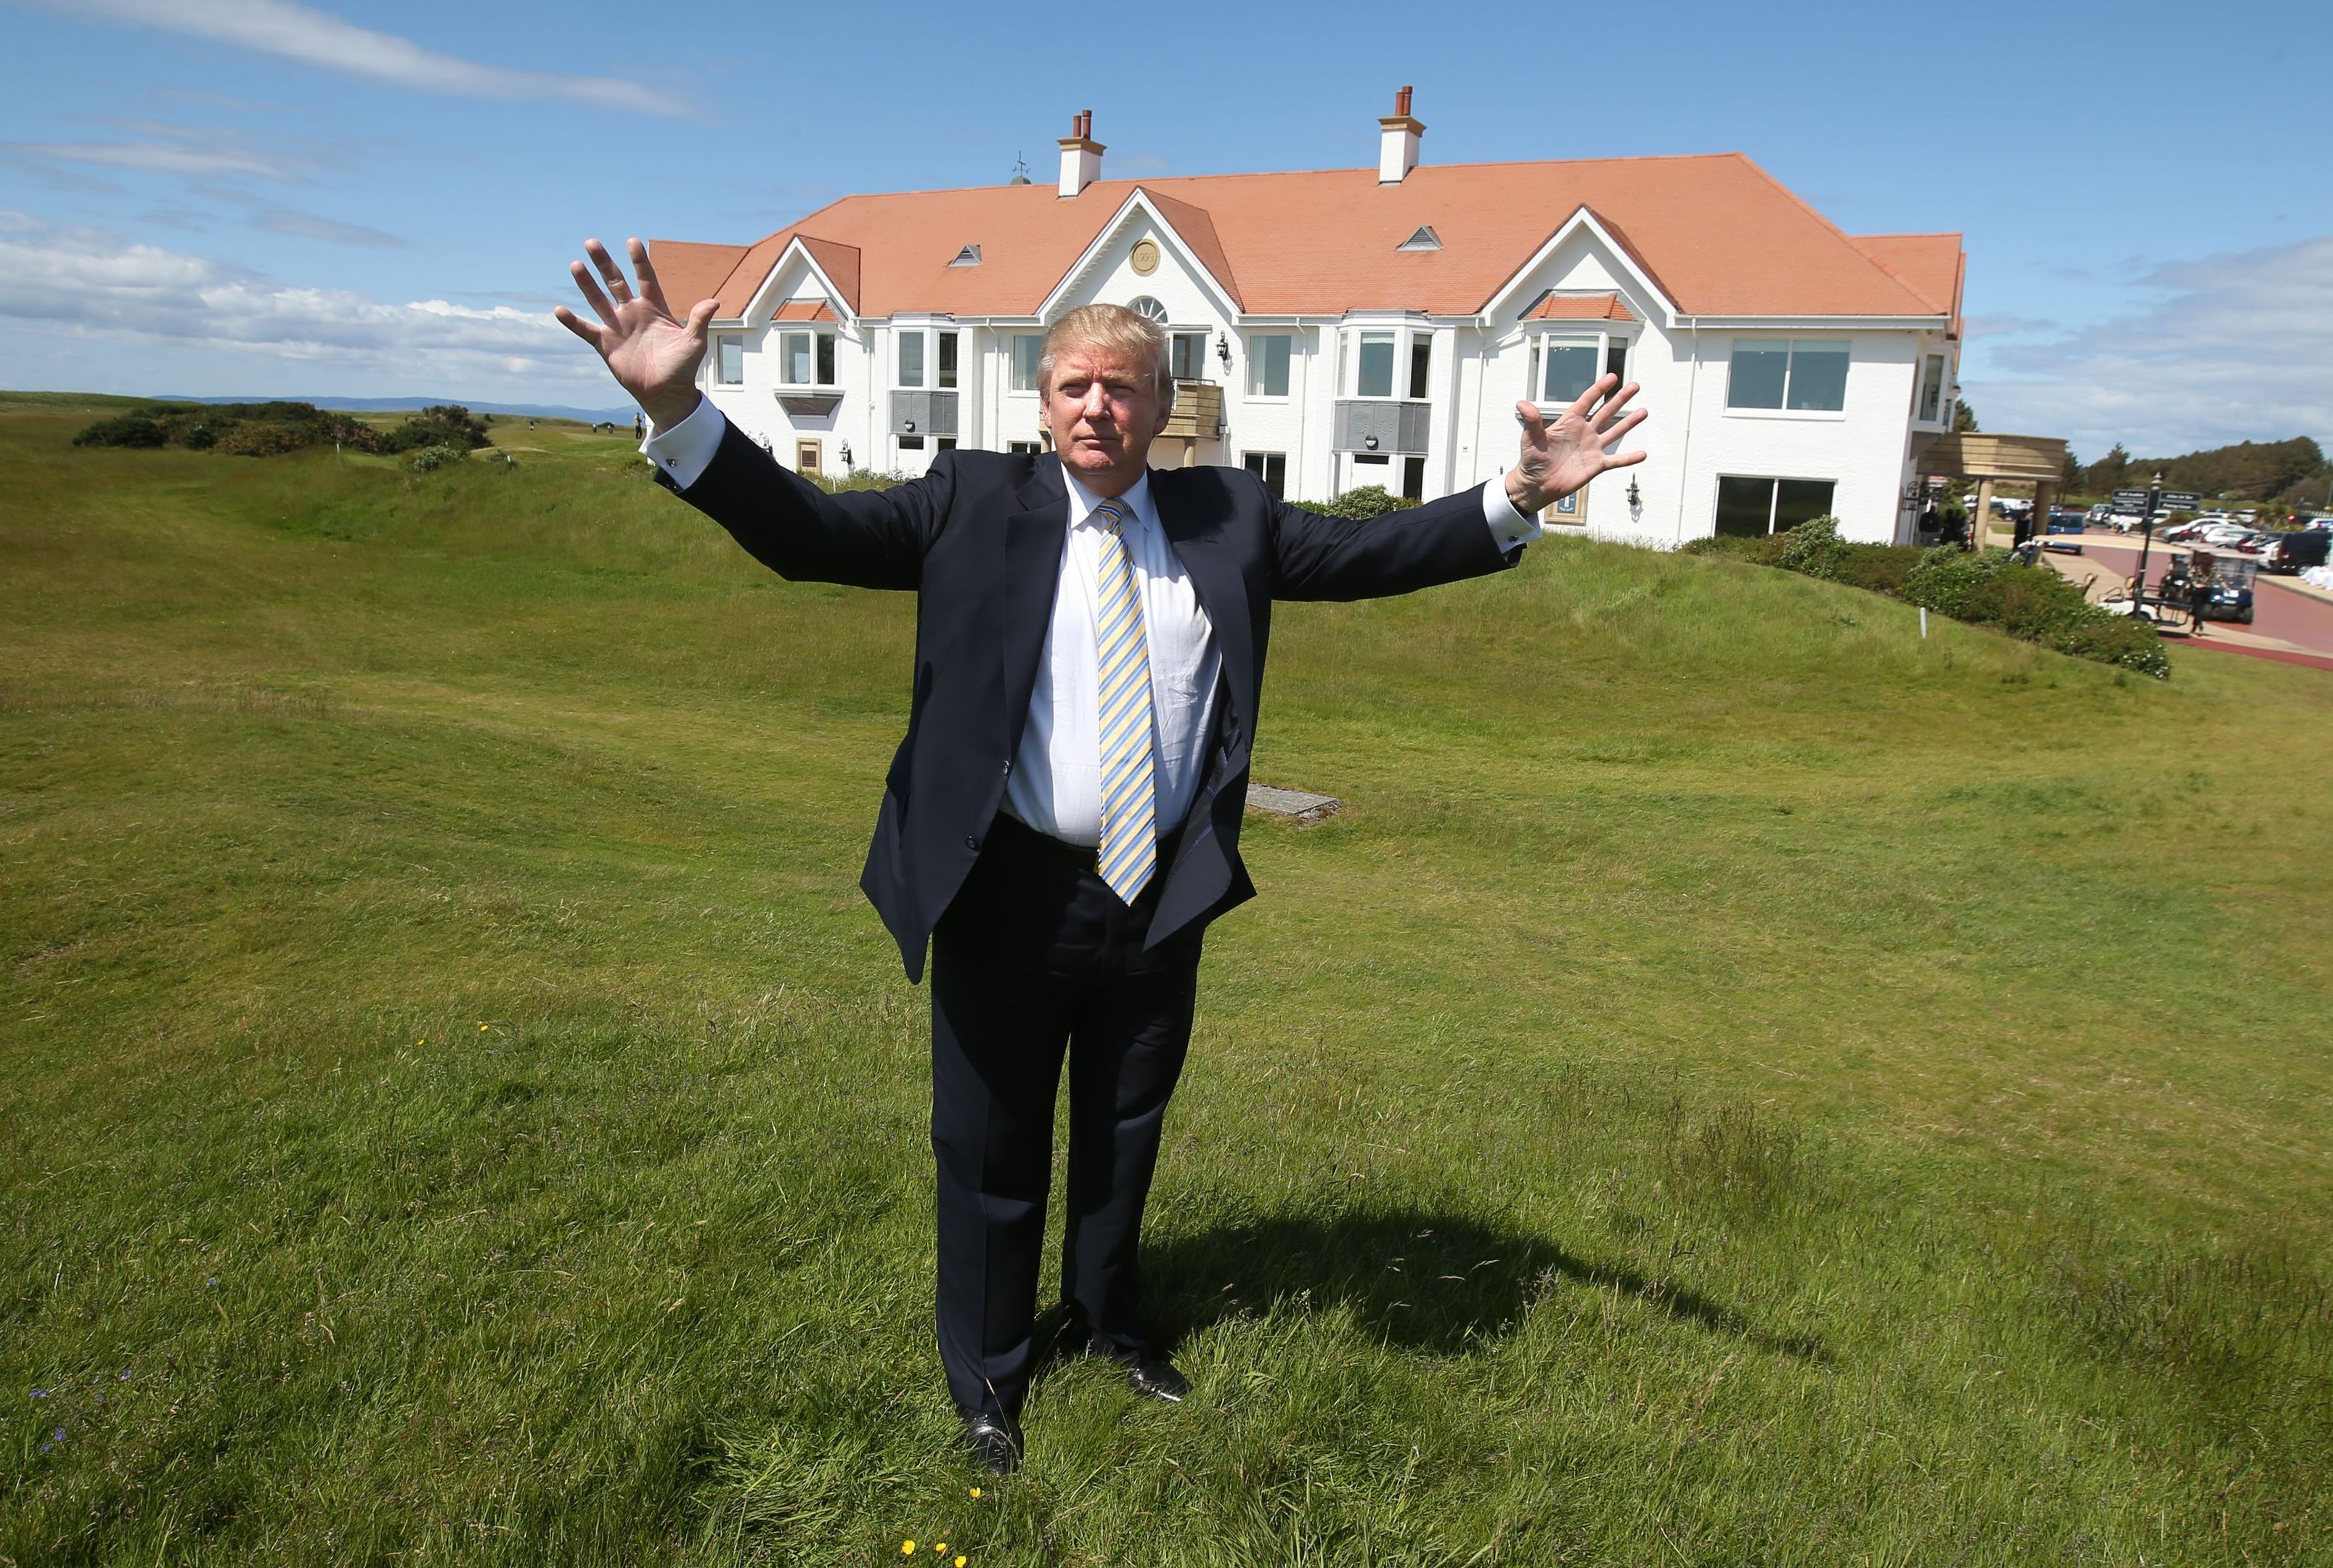 Donald Trump at Turnberry soon after he bought it in 2014.